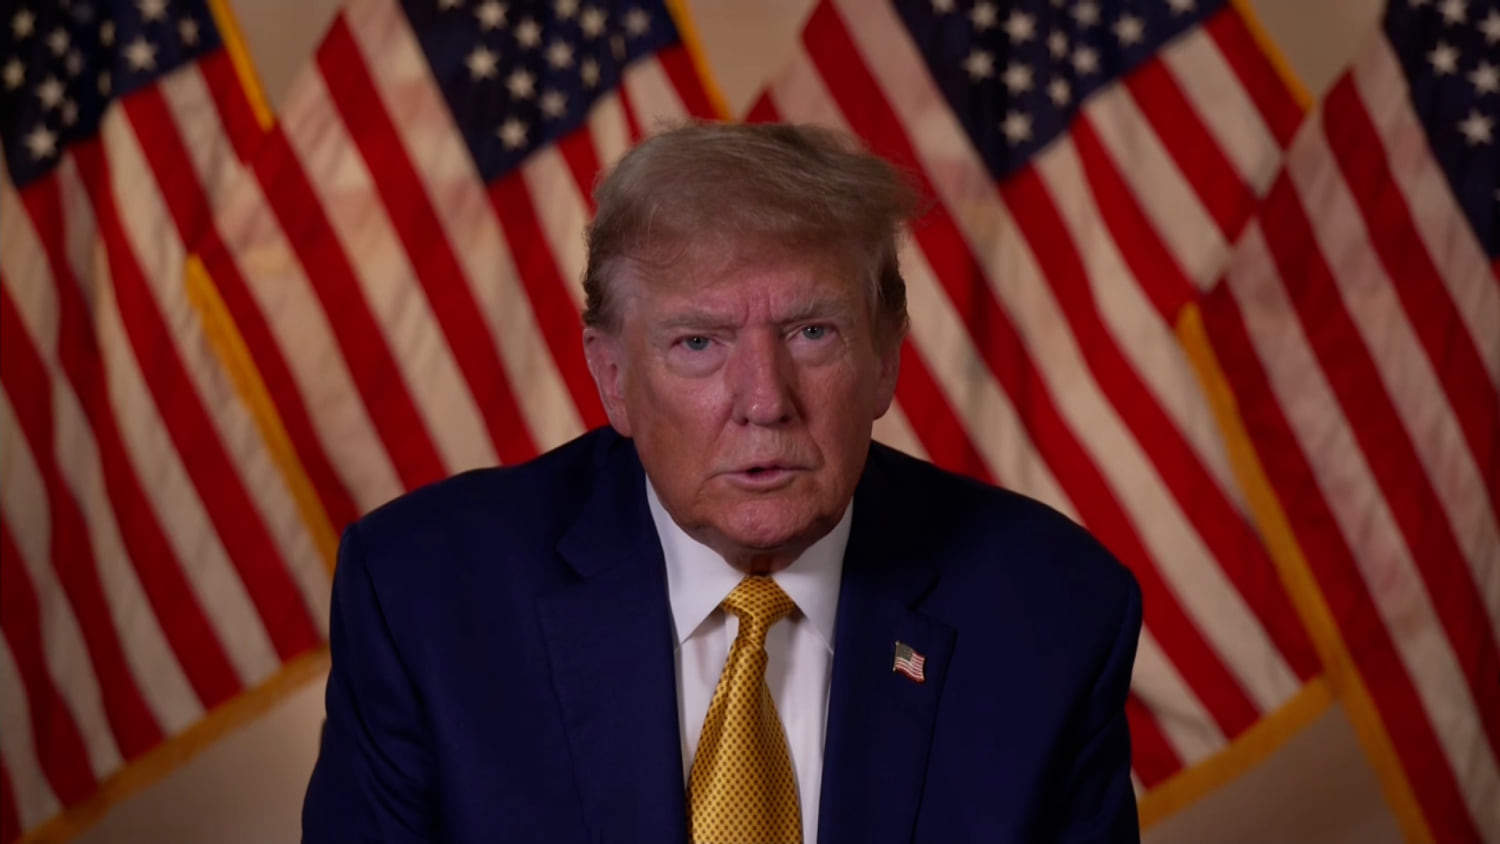 Trump says he has no regrets about challenging 2020 election results